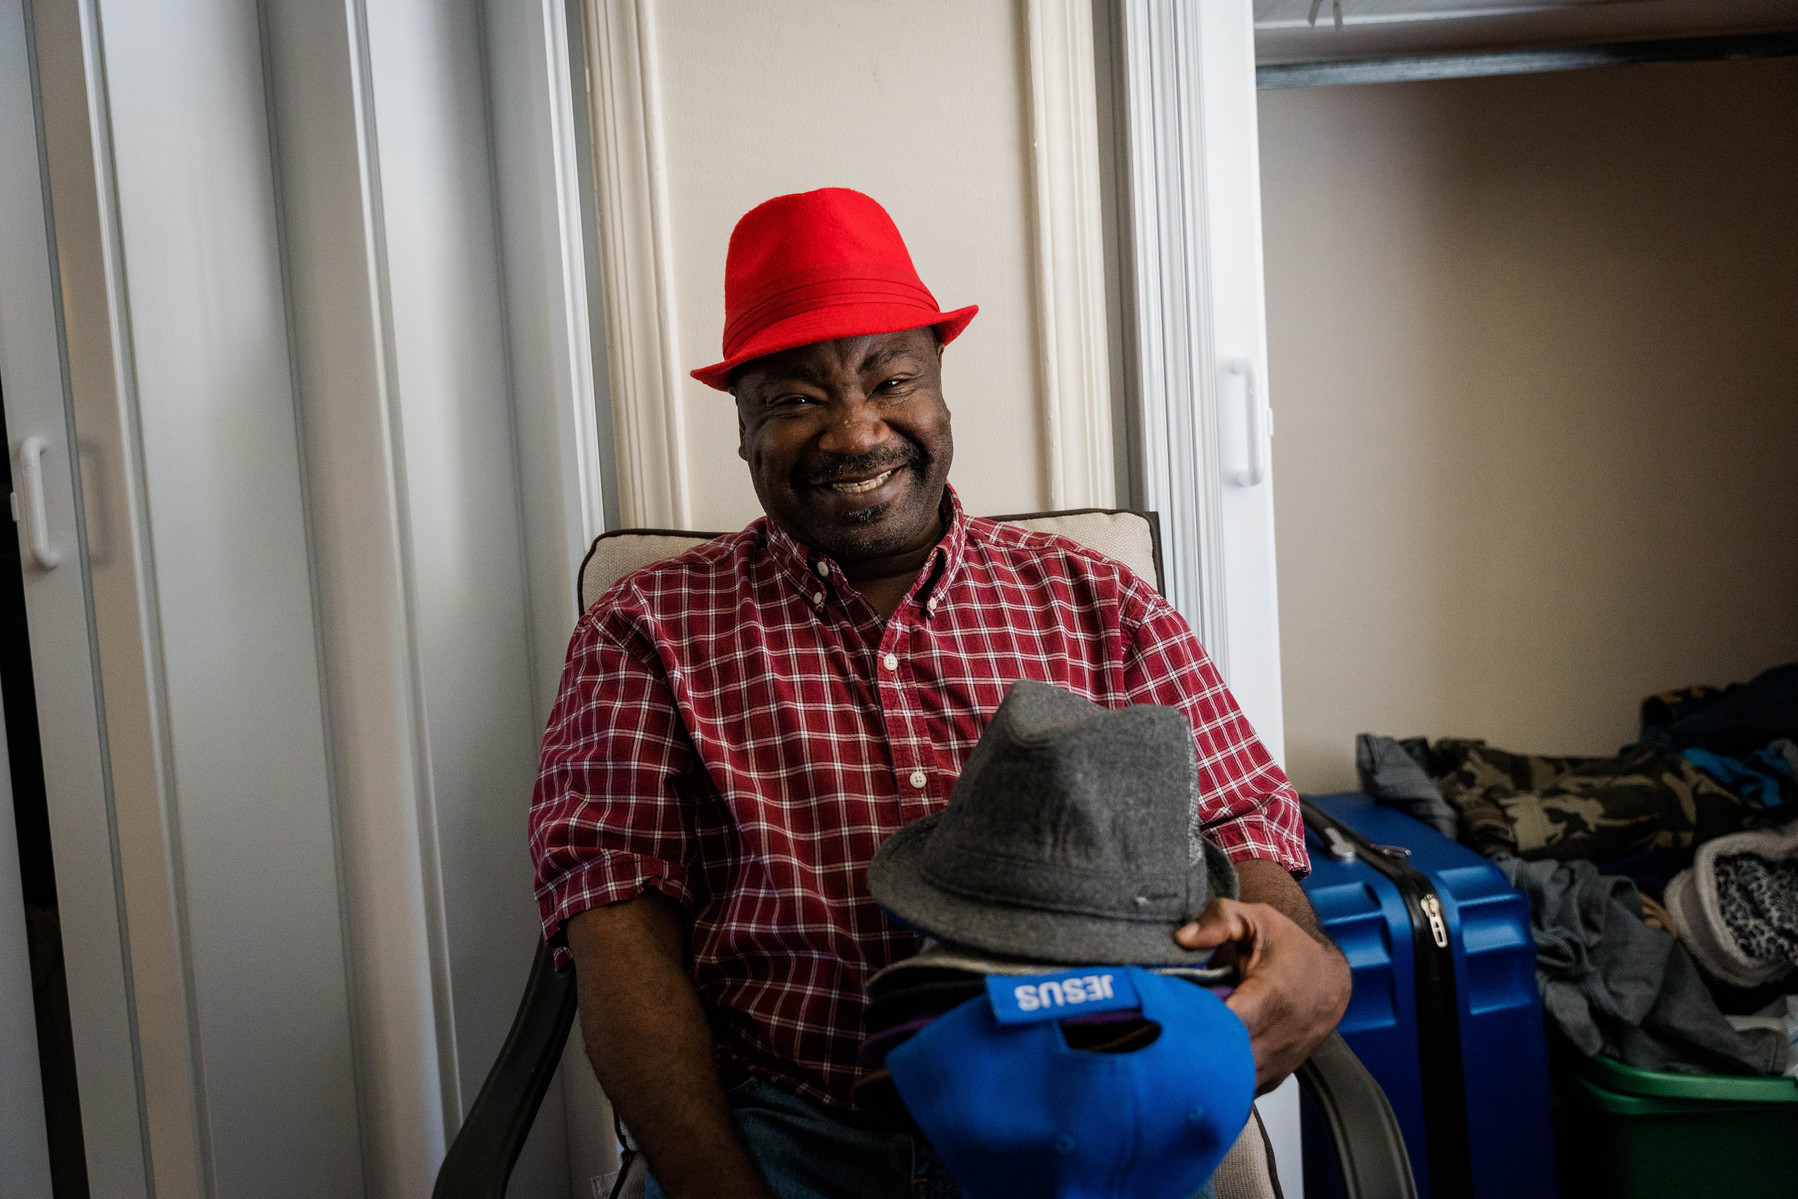 African American man in a plaid shirt and red hat smiles in his living room while holding a stack of hats.